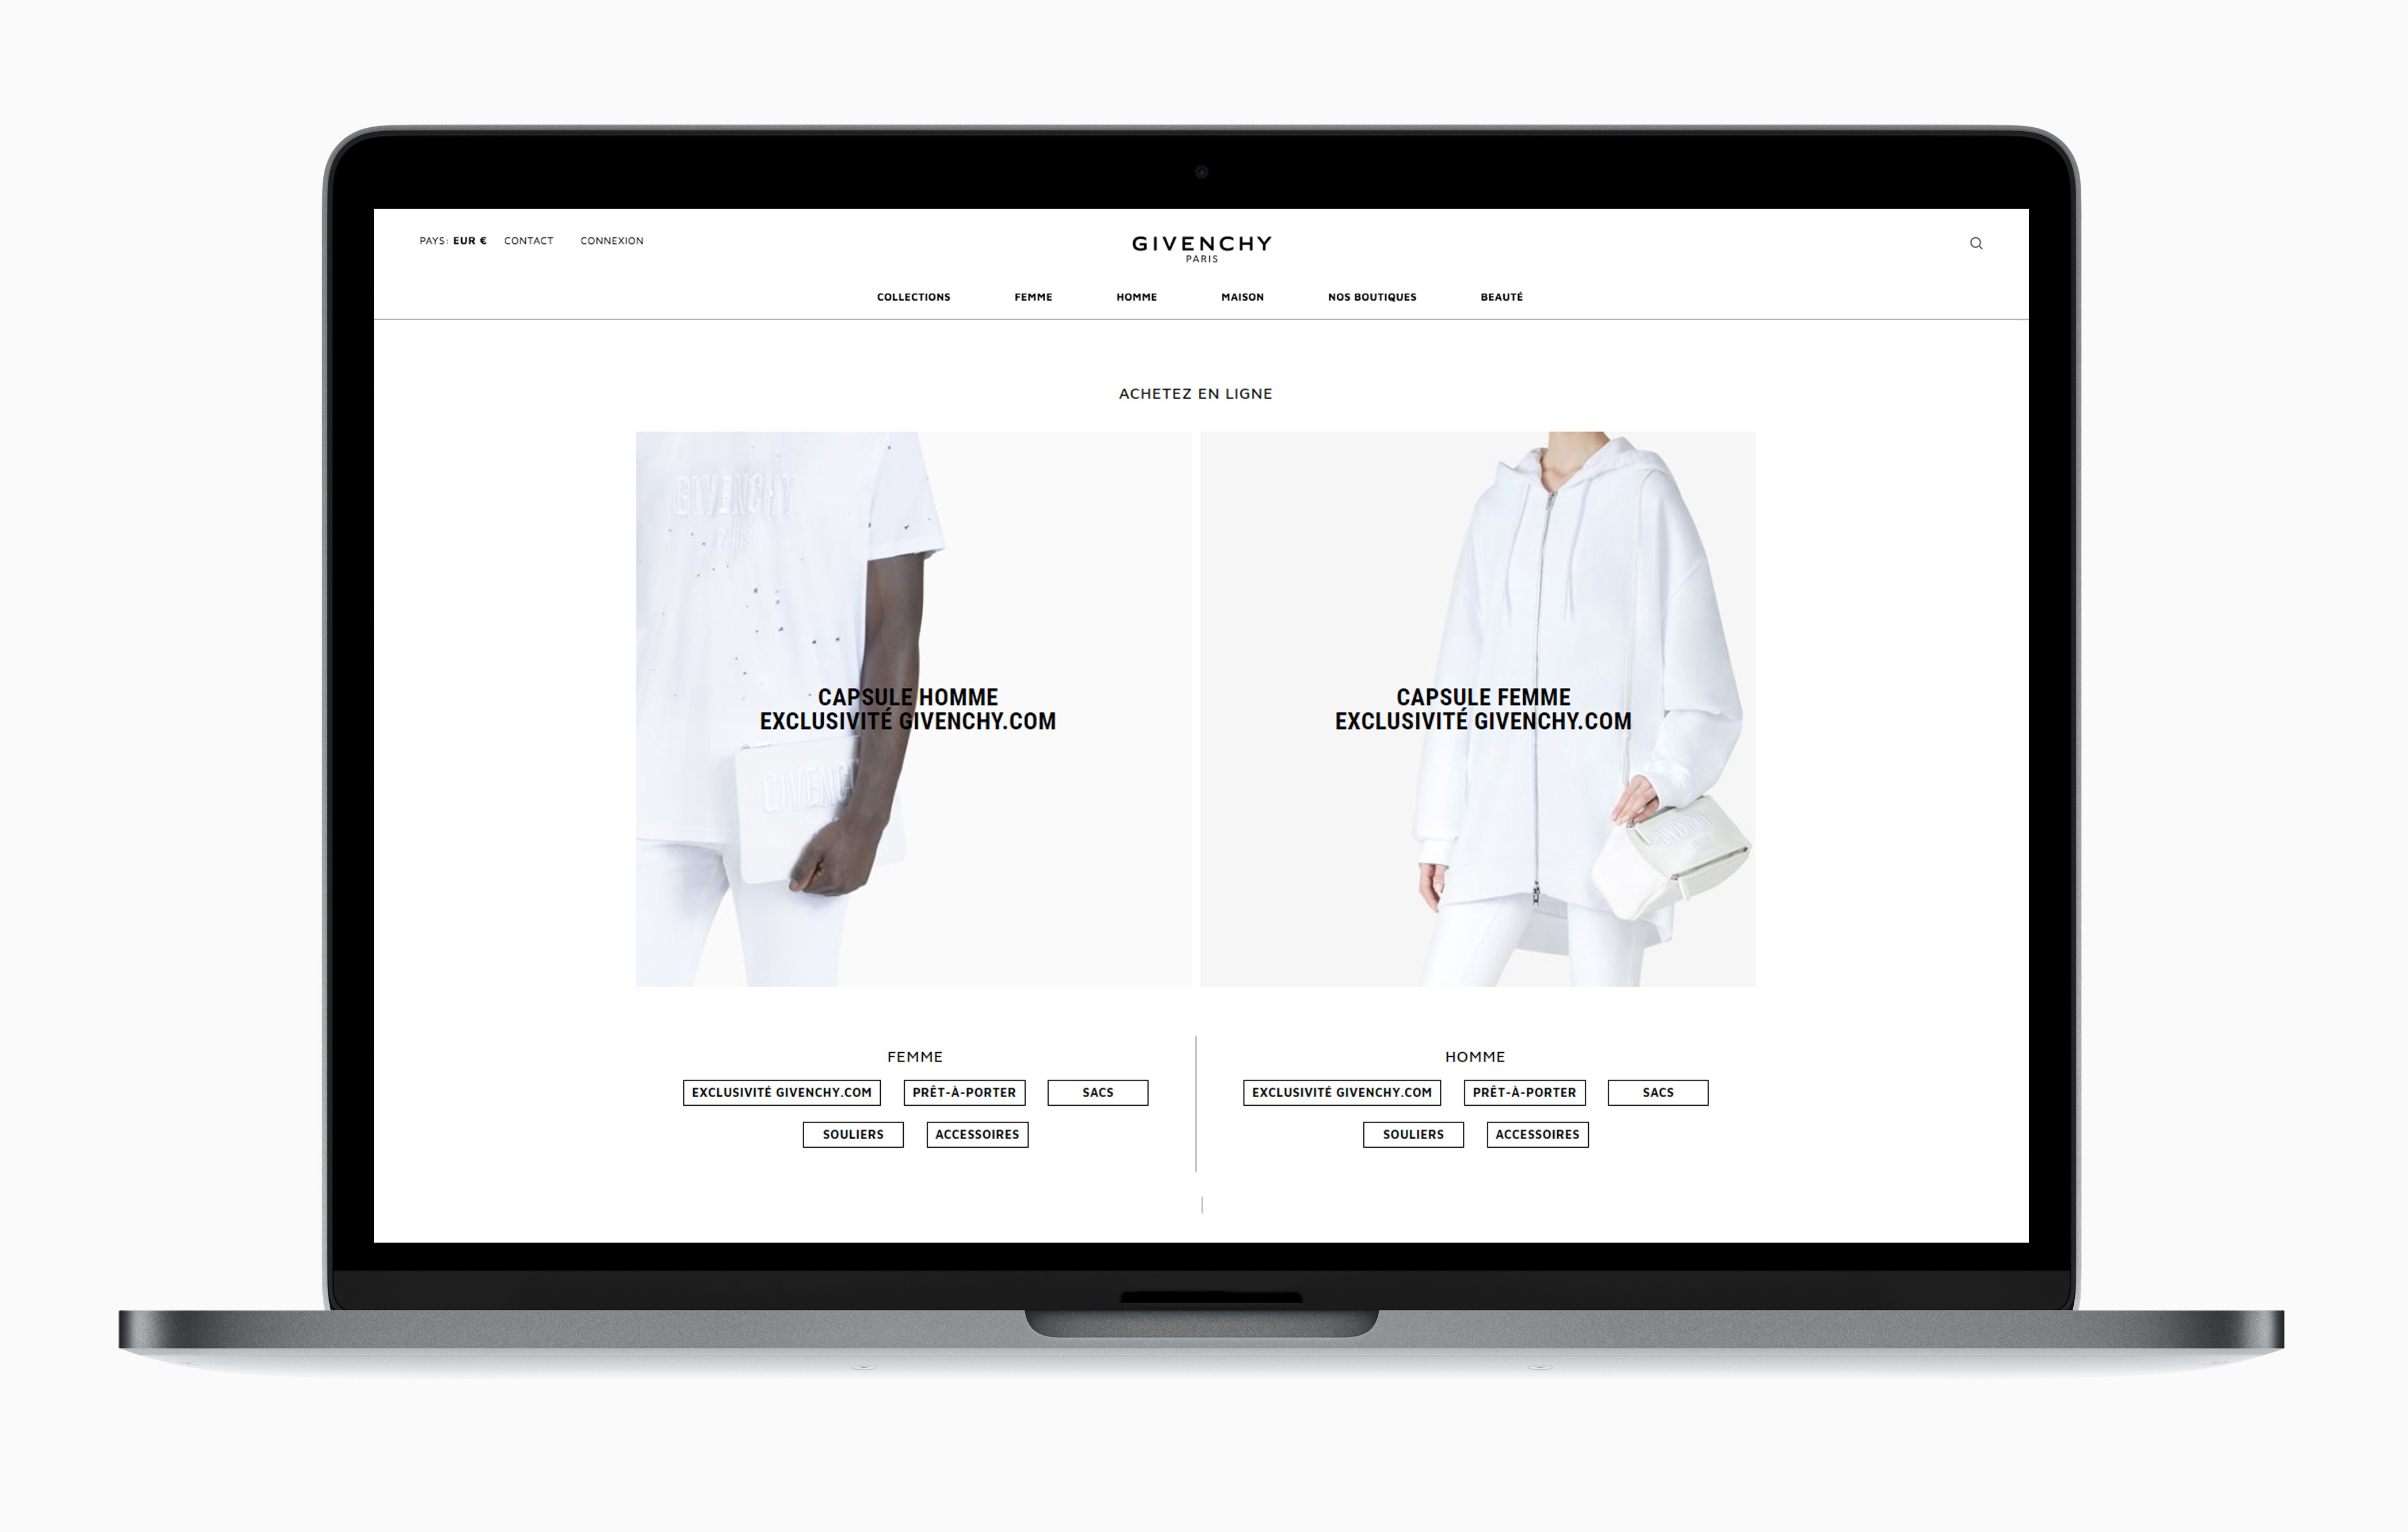 Givenchy has launched a new e-commerce website.